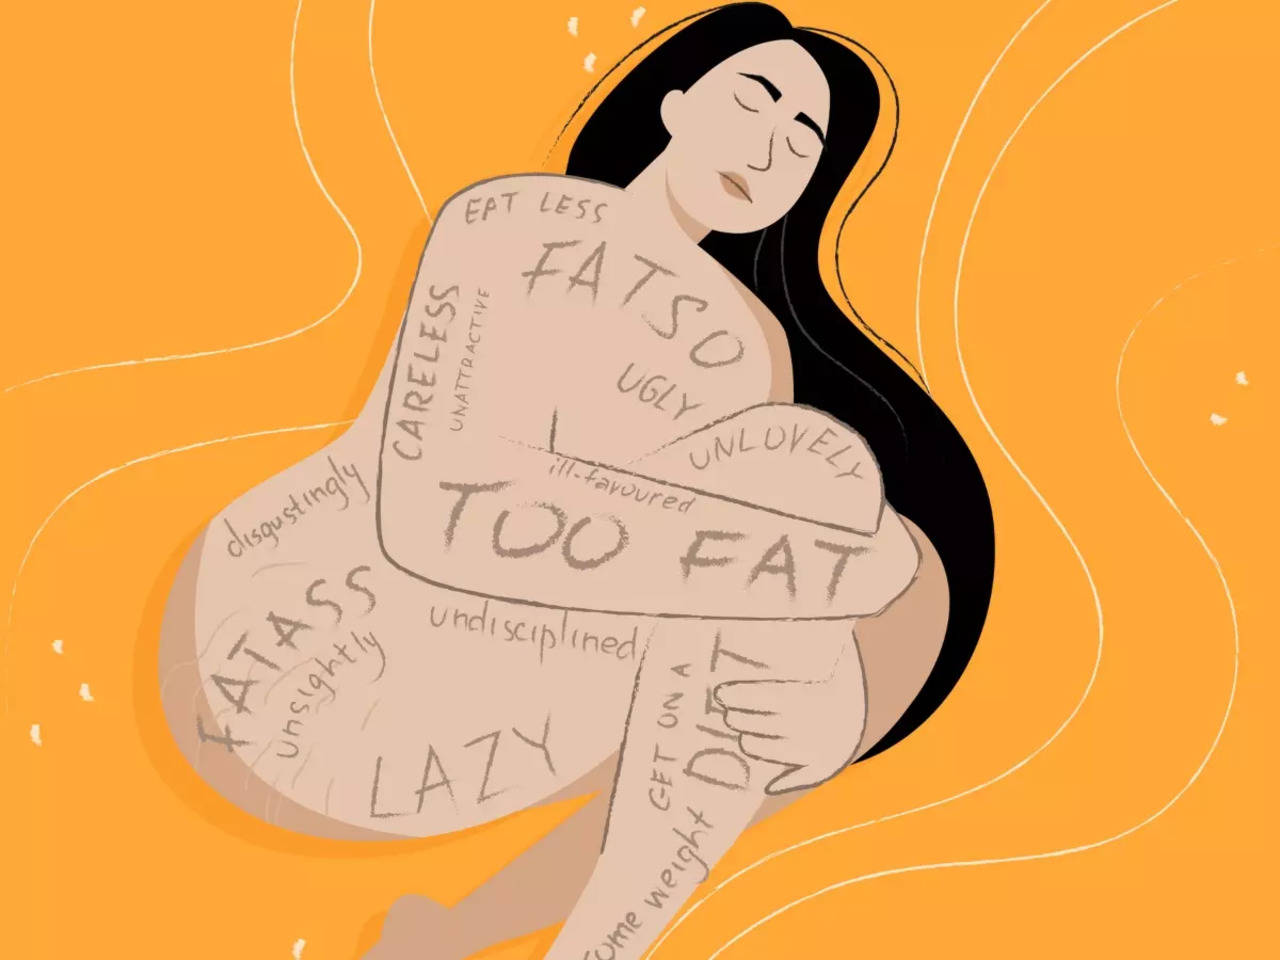 His Story/Her Story “My husband fat shames me in front of everyone”